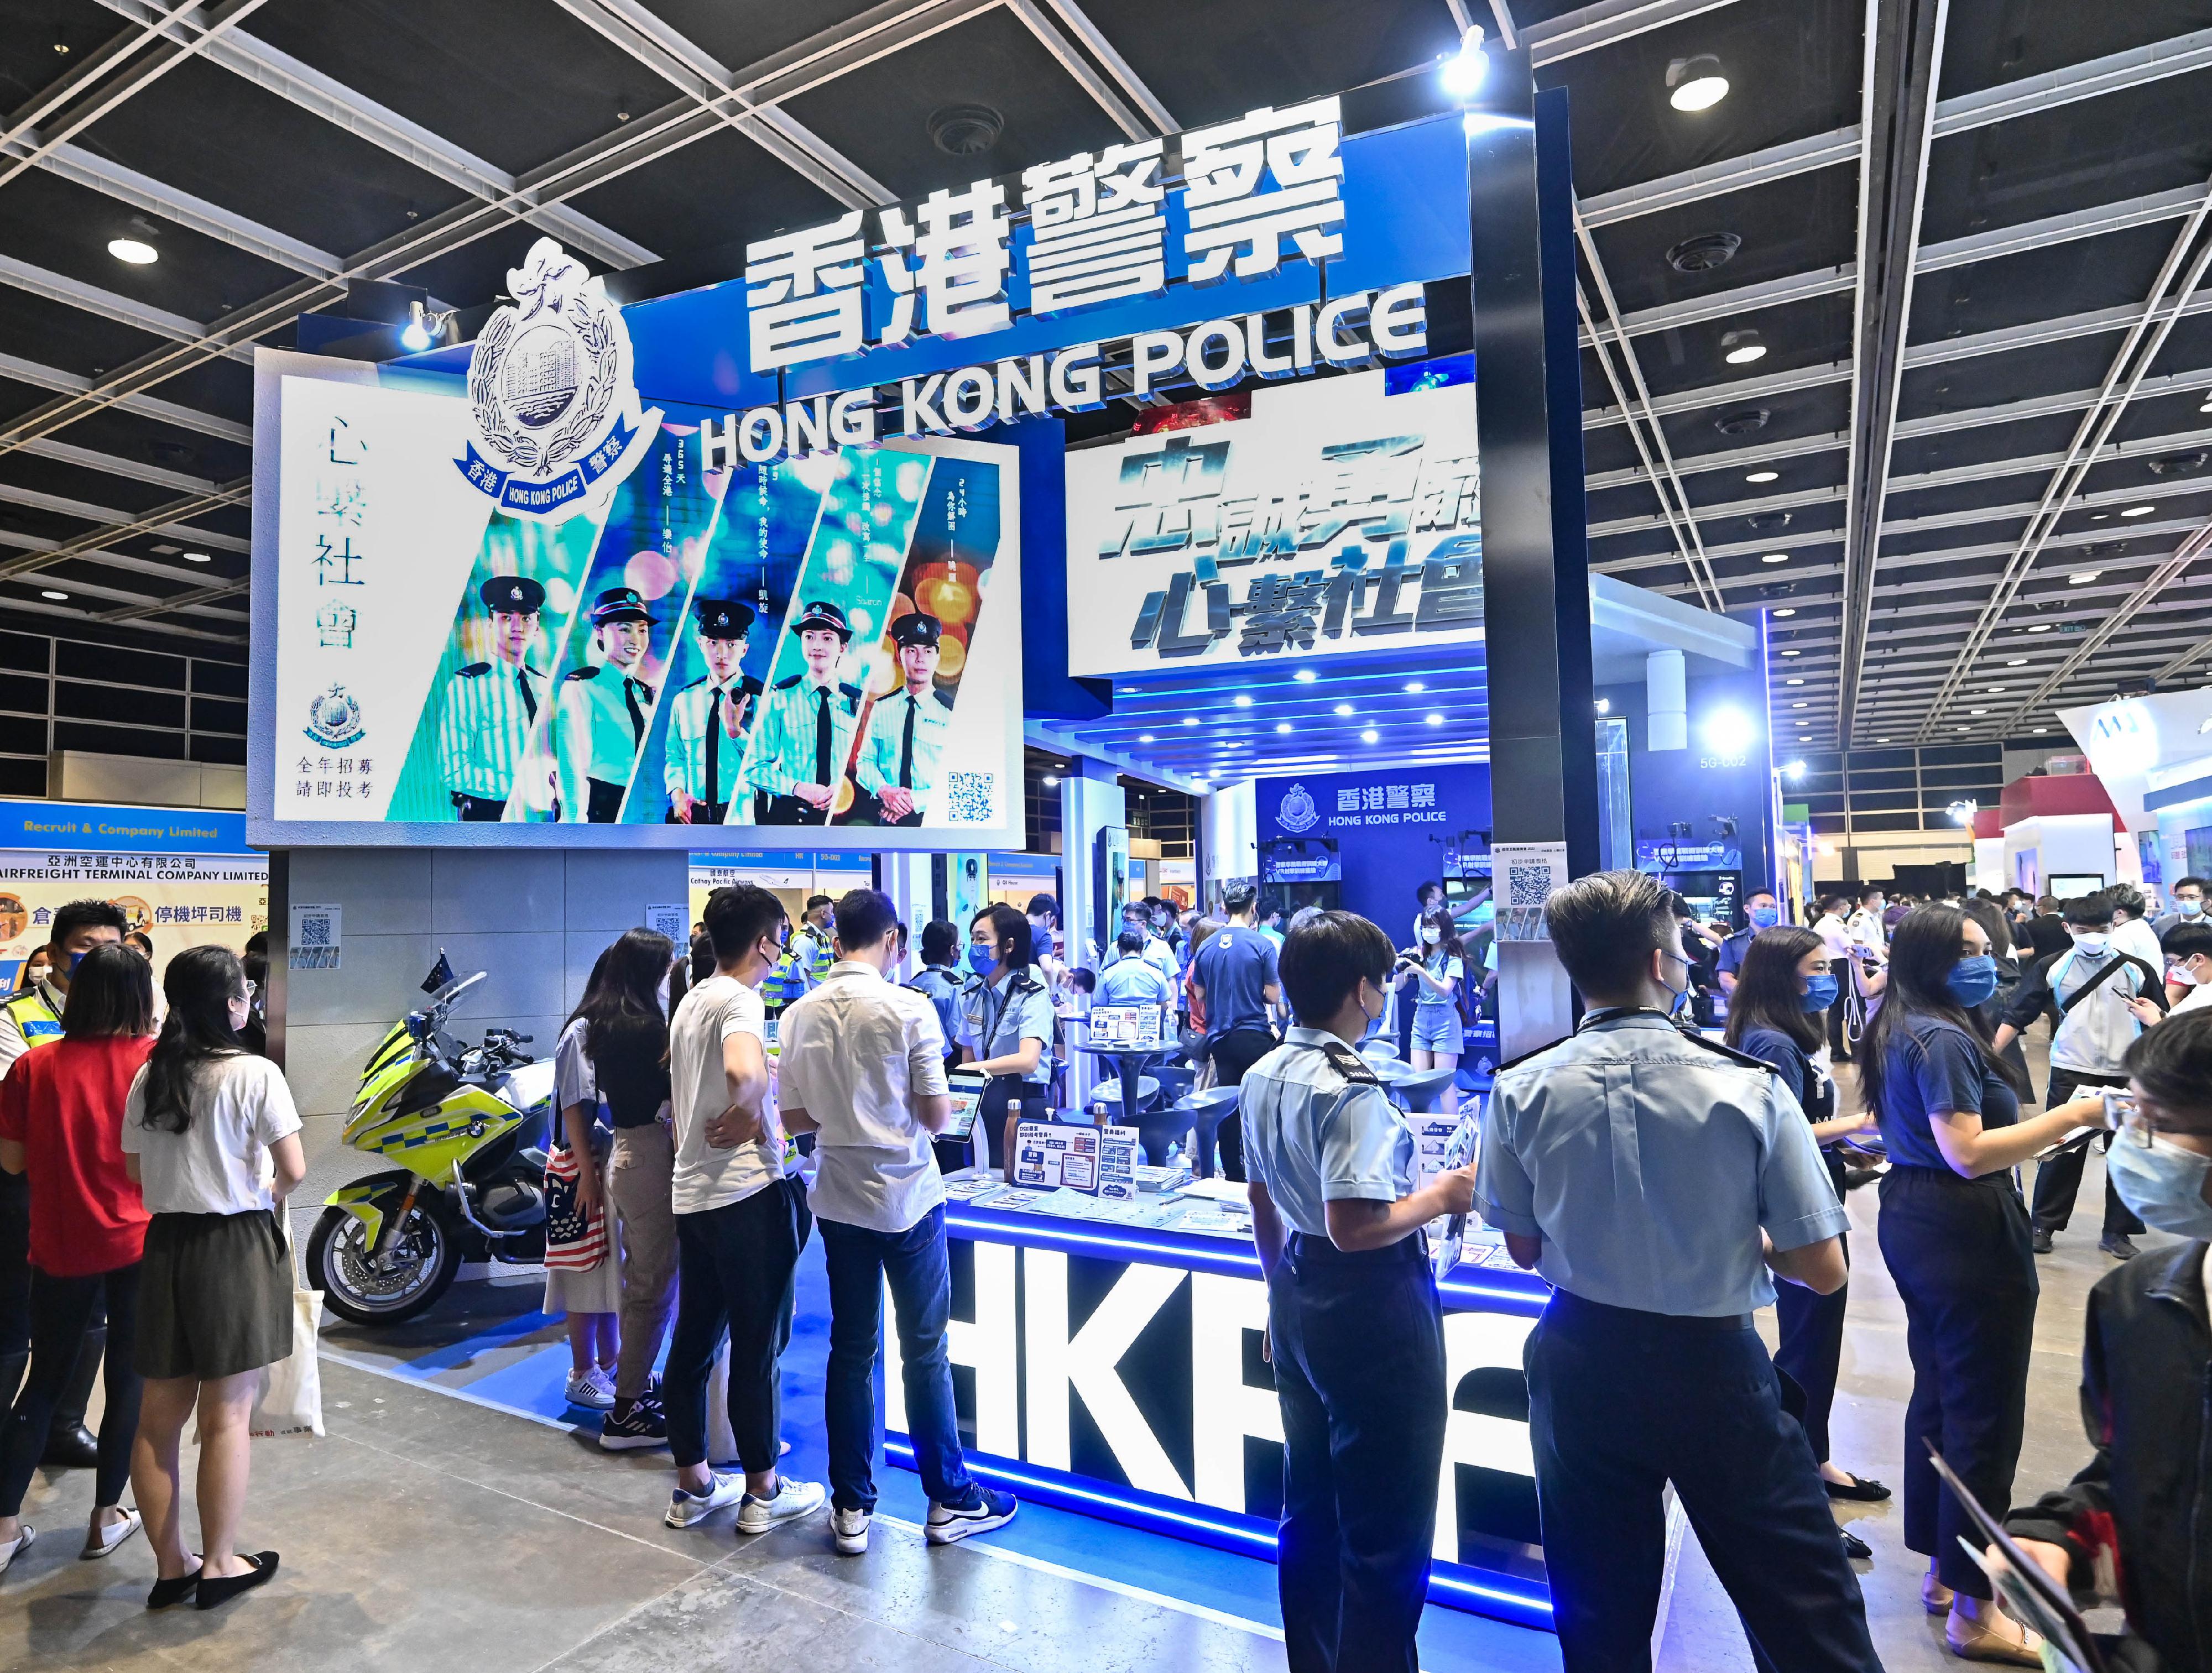 The Police Force introduces its work and provides recruitment information to visitors at the four-day Education and Careers Expo 2022 starting today (July 21).